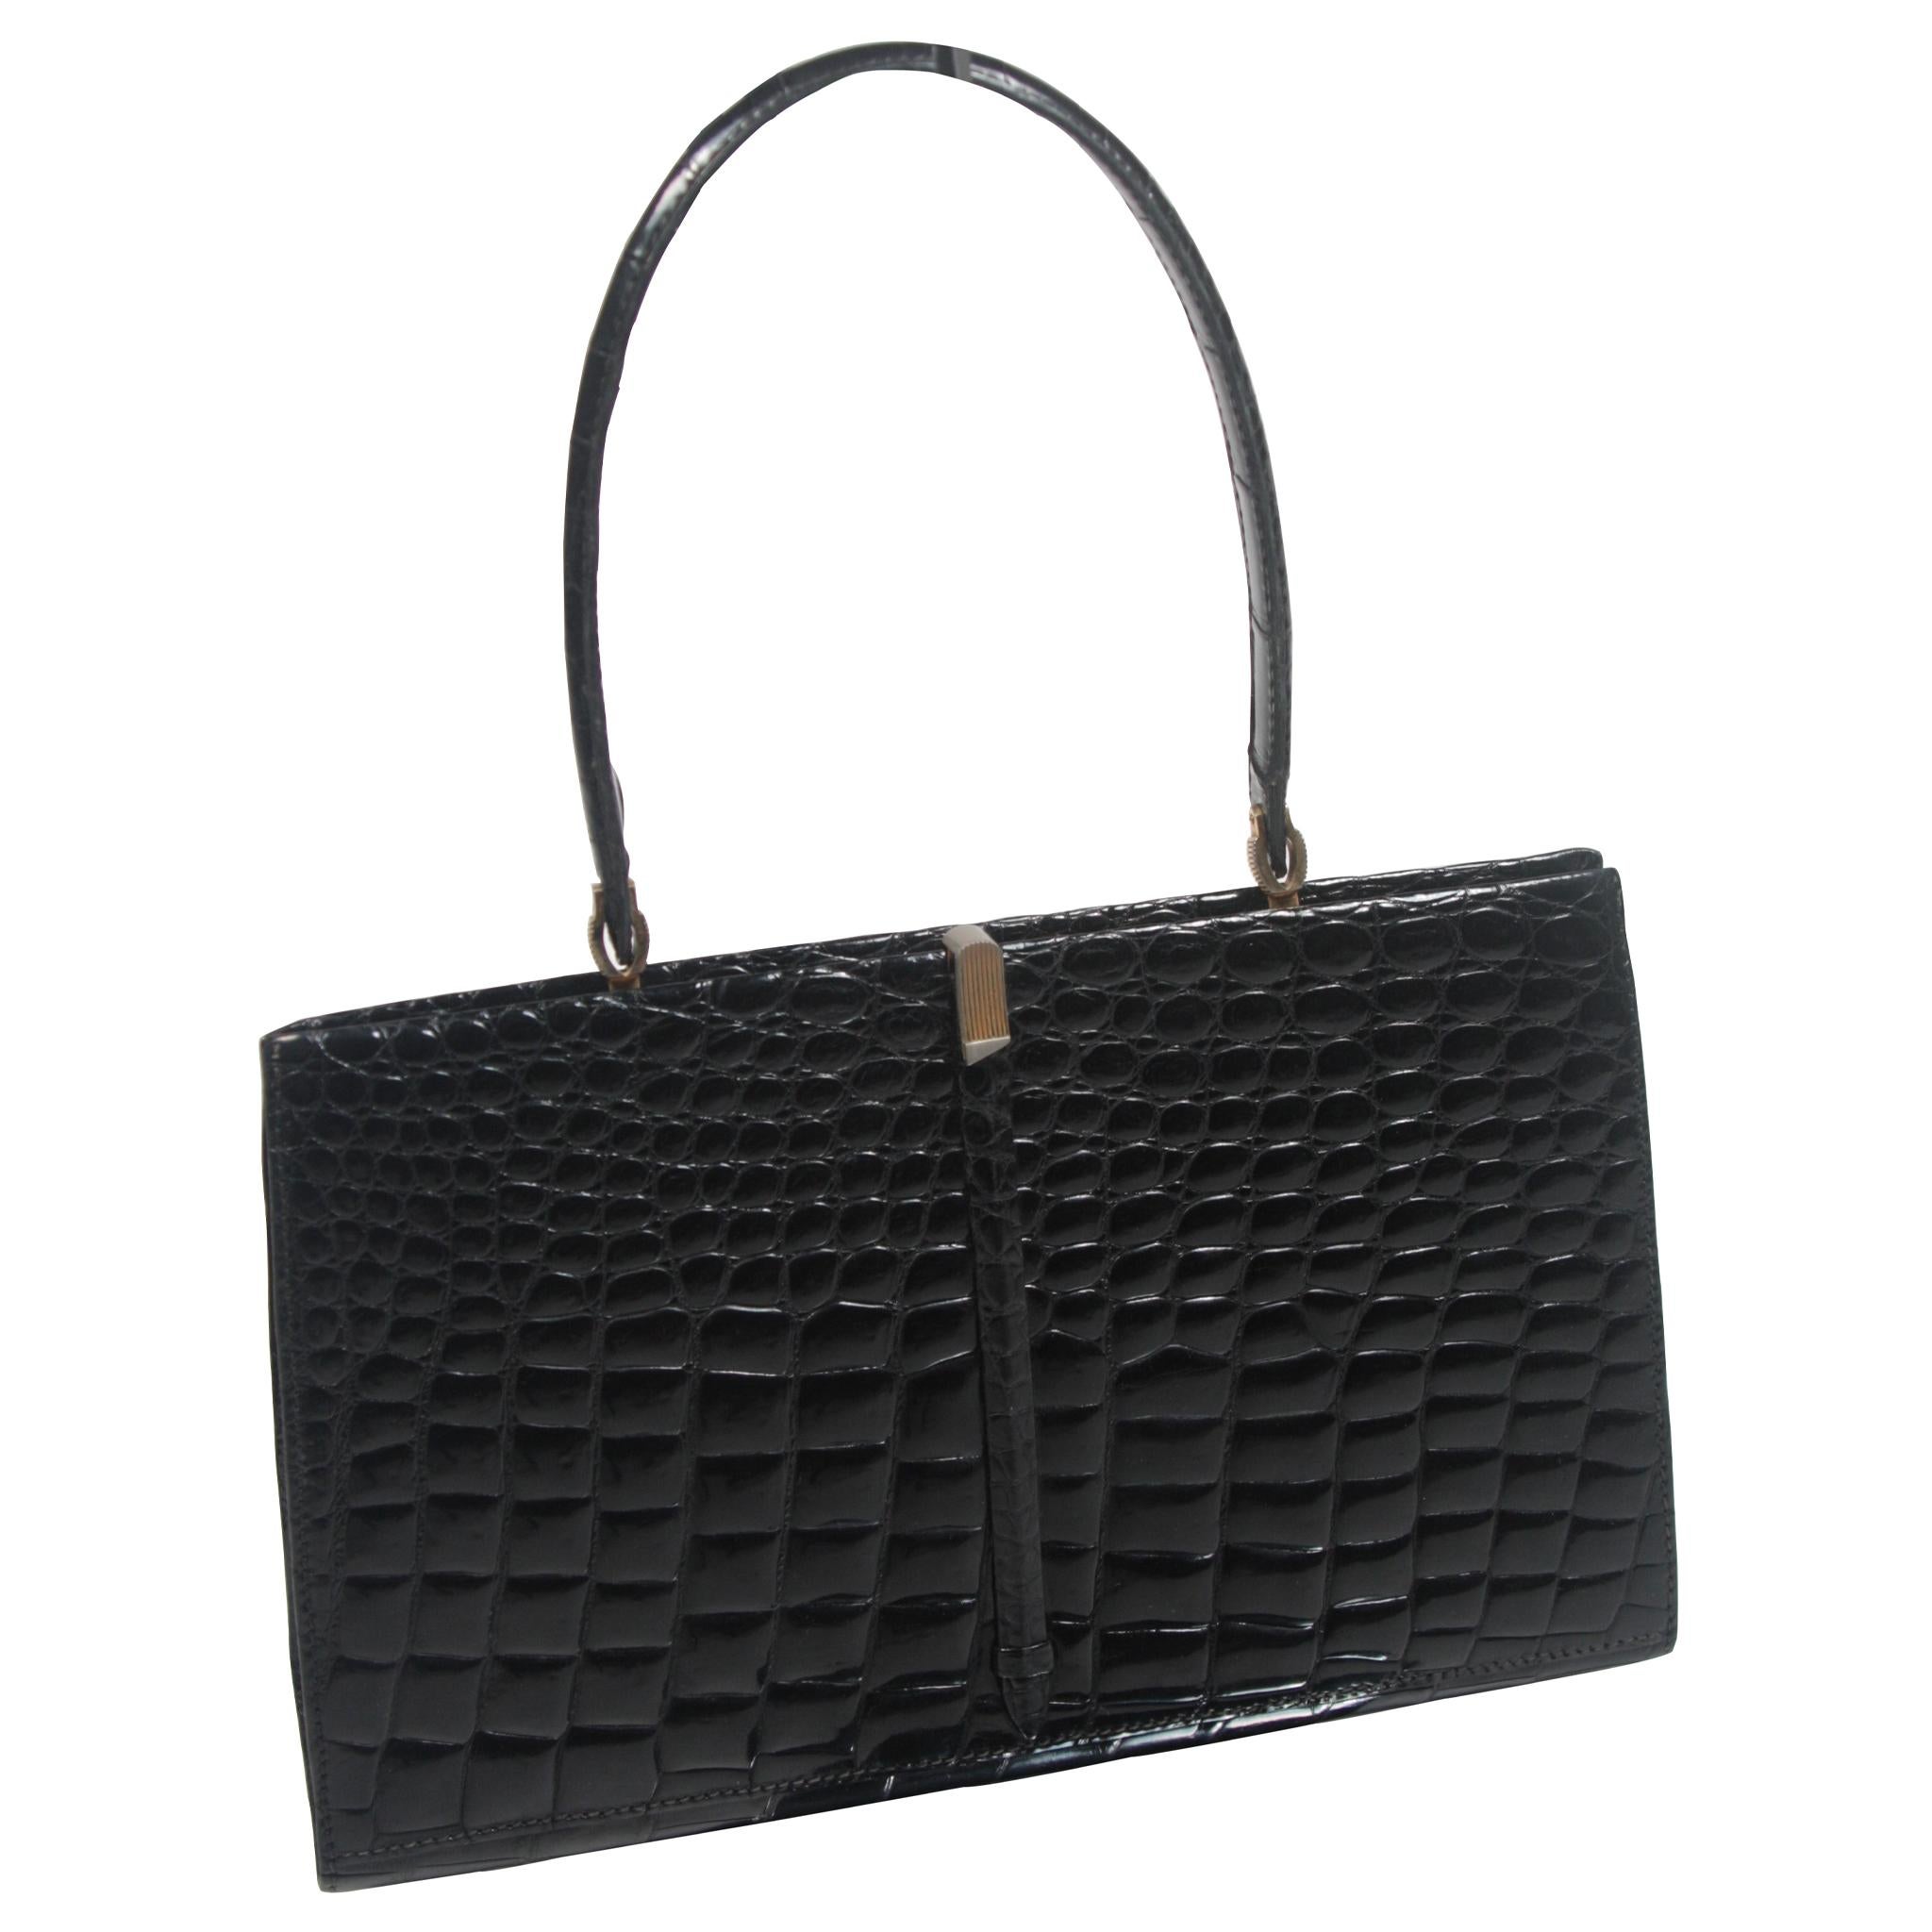 This Barnes Shoe Salon handbag is composed of a striking beautiful black Crocodile. It features gold hardware and interior compartments. In excellent vintage condition. Made in France. 

**Please cross-reference measurements for personal accuracy.